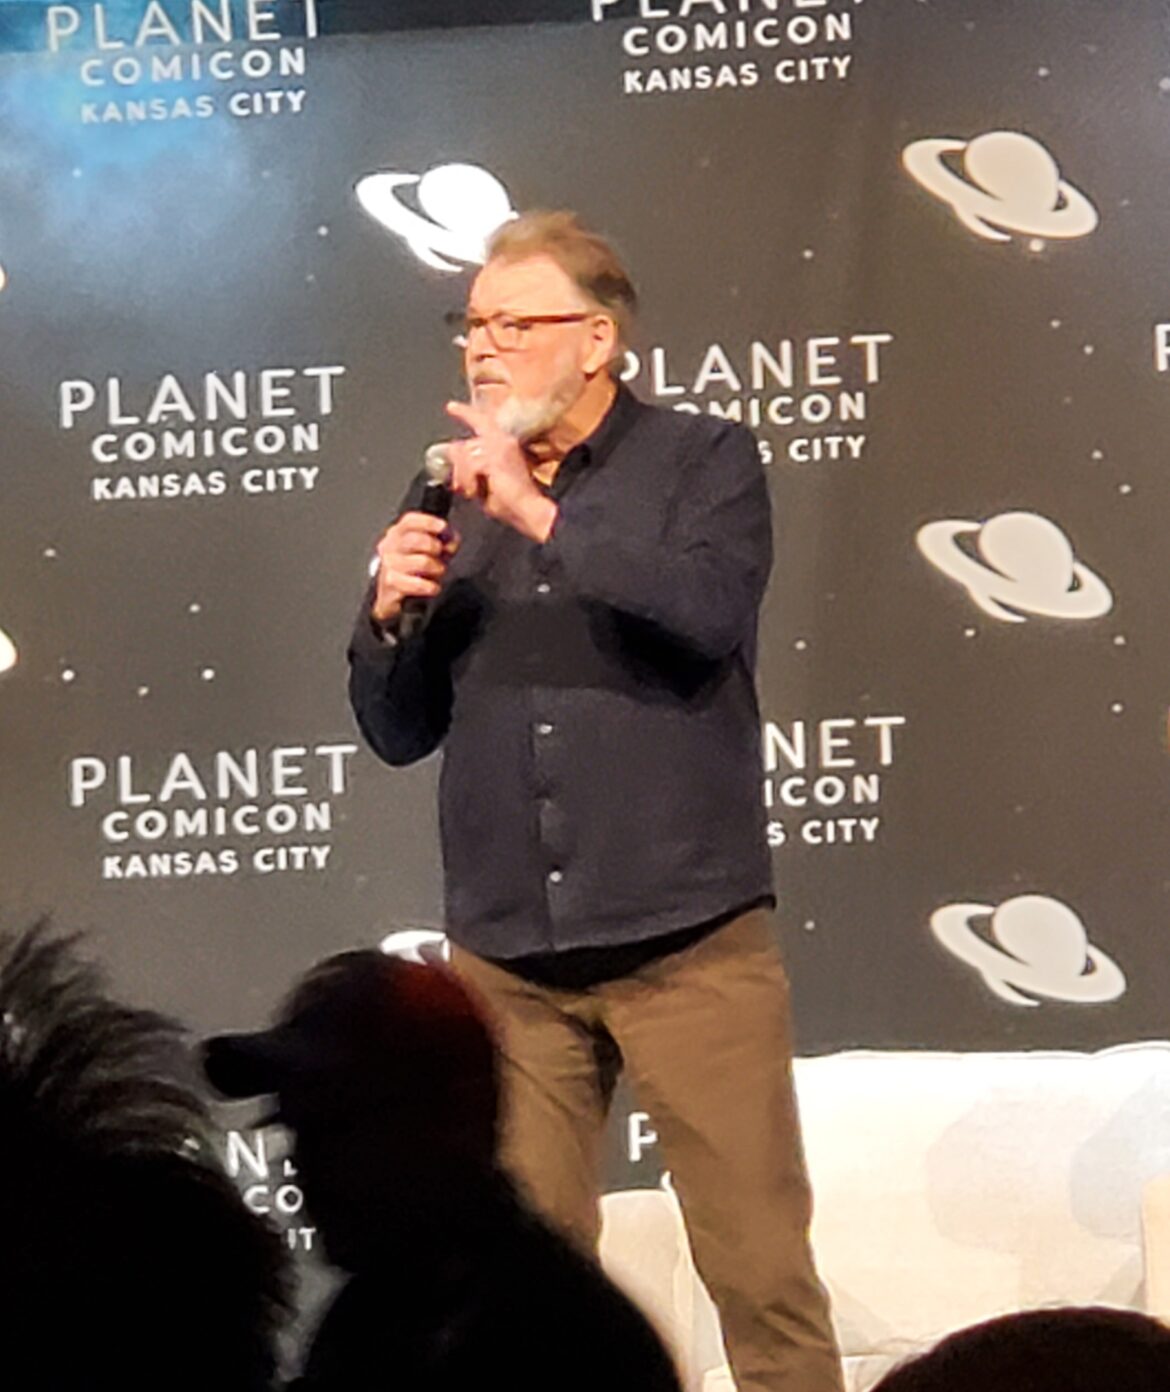 Jonathan Frakes Discusses Star Trek and More @ Planet Comicon